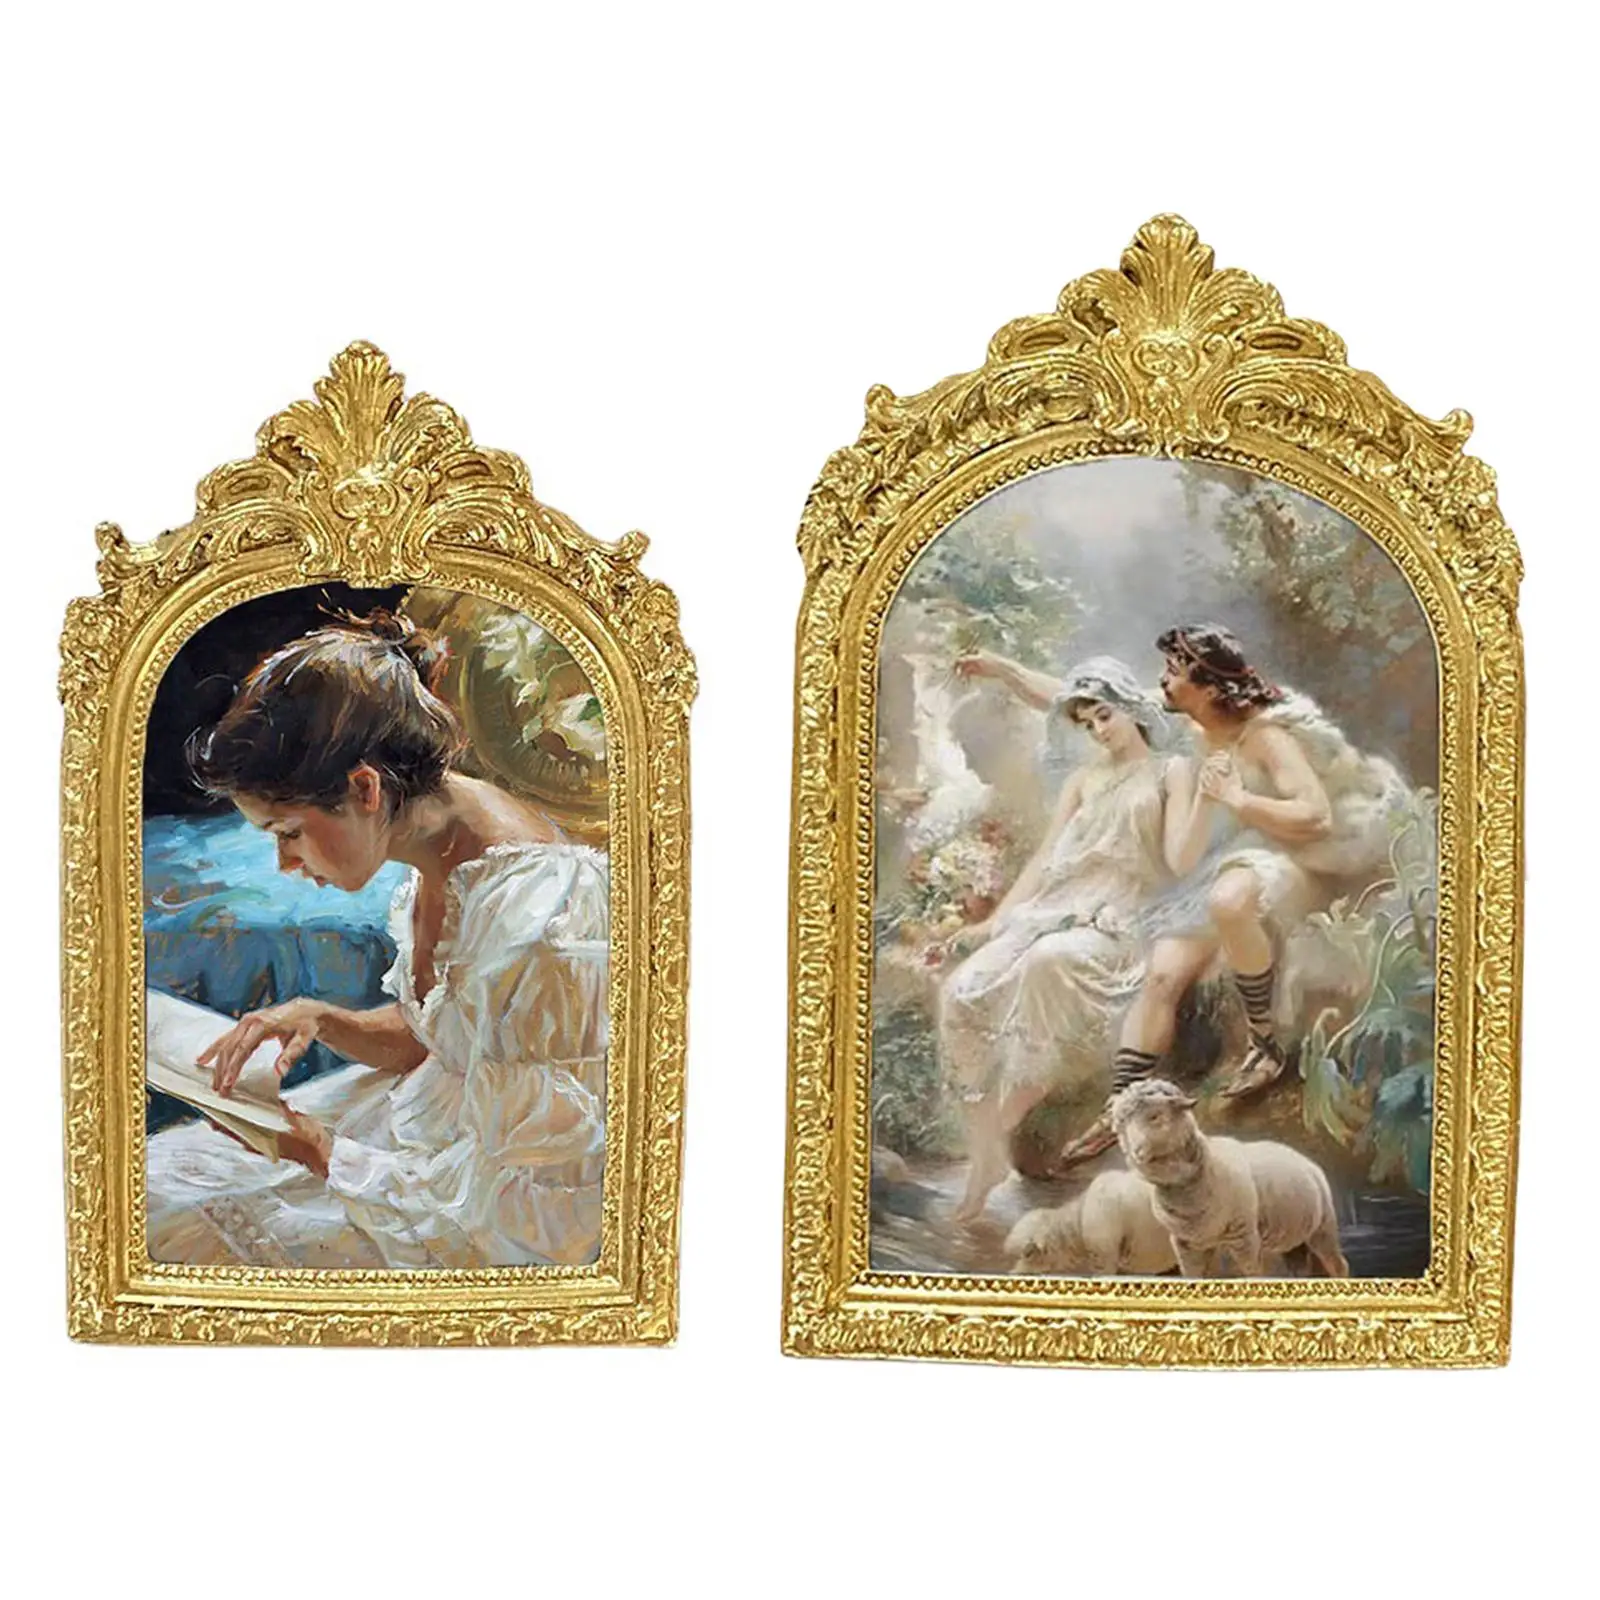 Antique Resin Photo Display Frame Old Fashioned Tabletop Wall Hanging Elegant Gift for Office